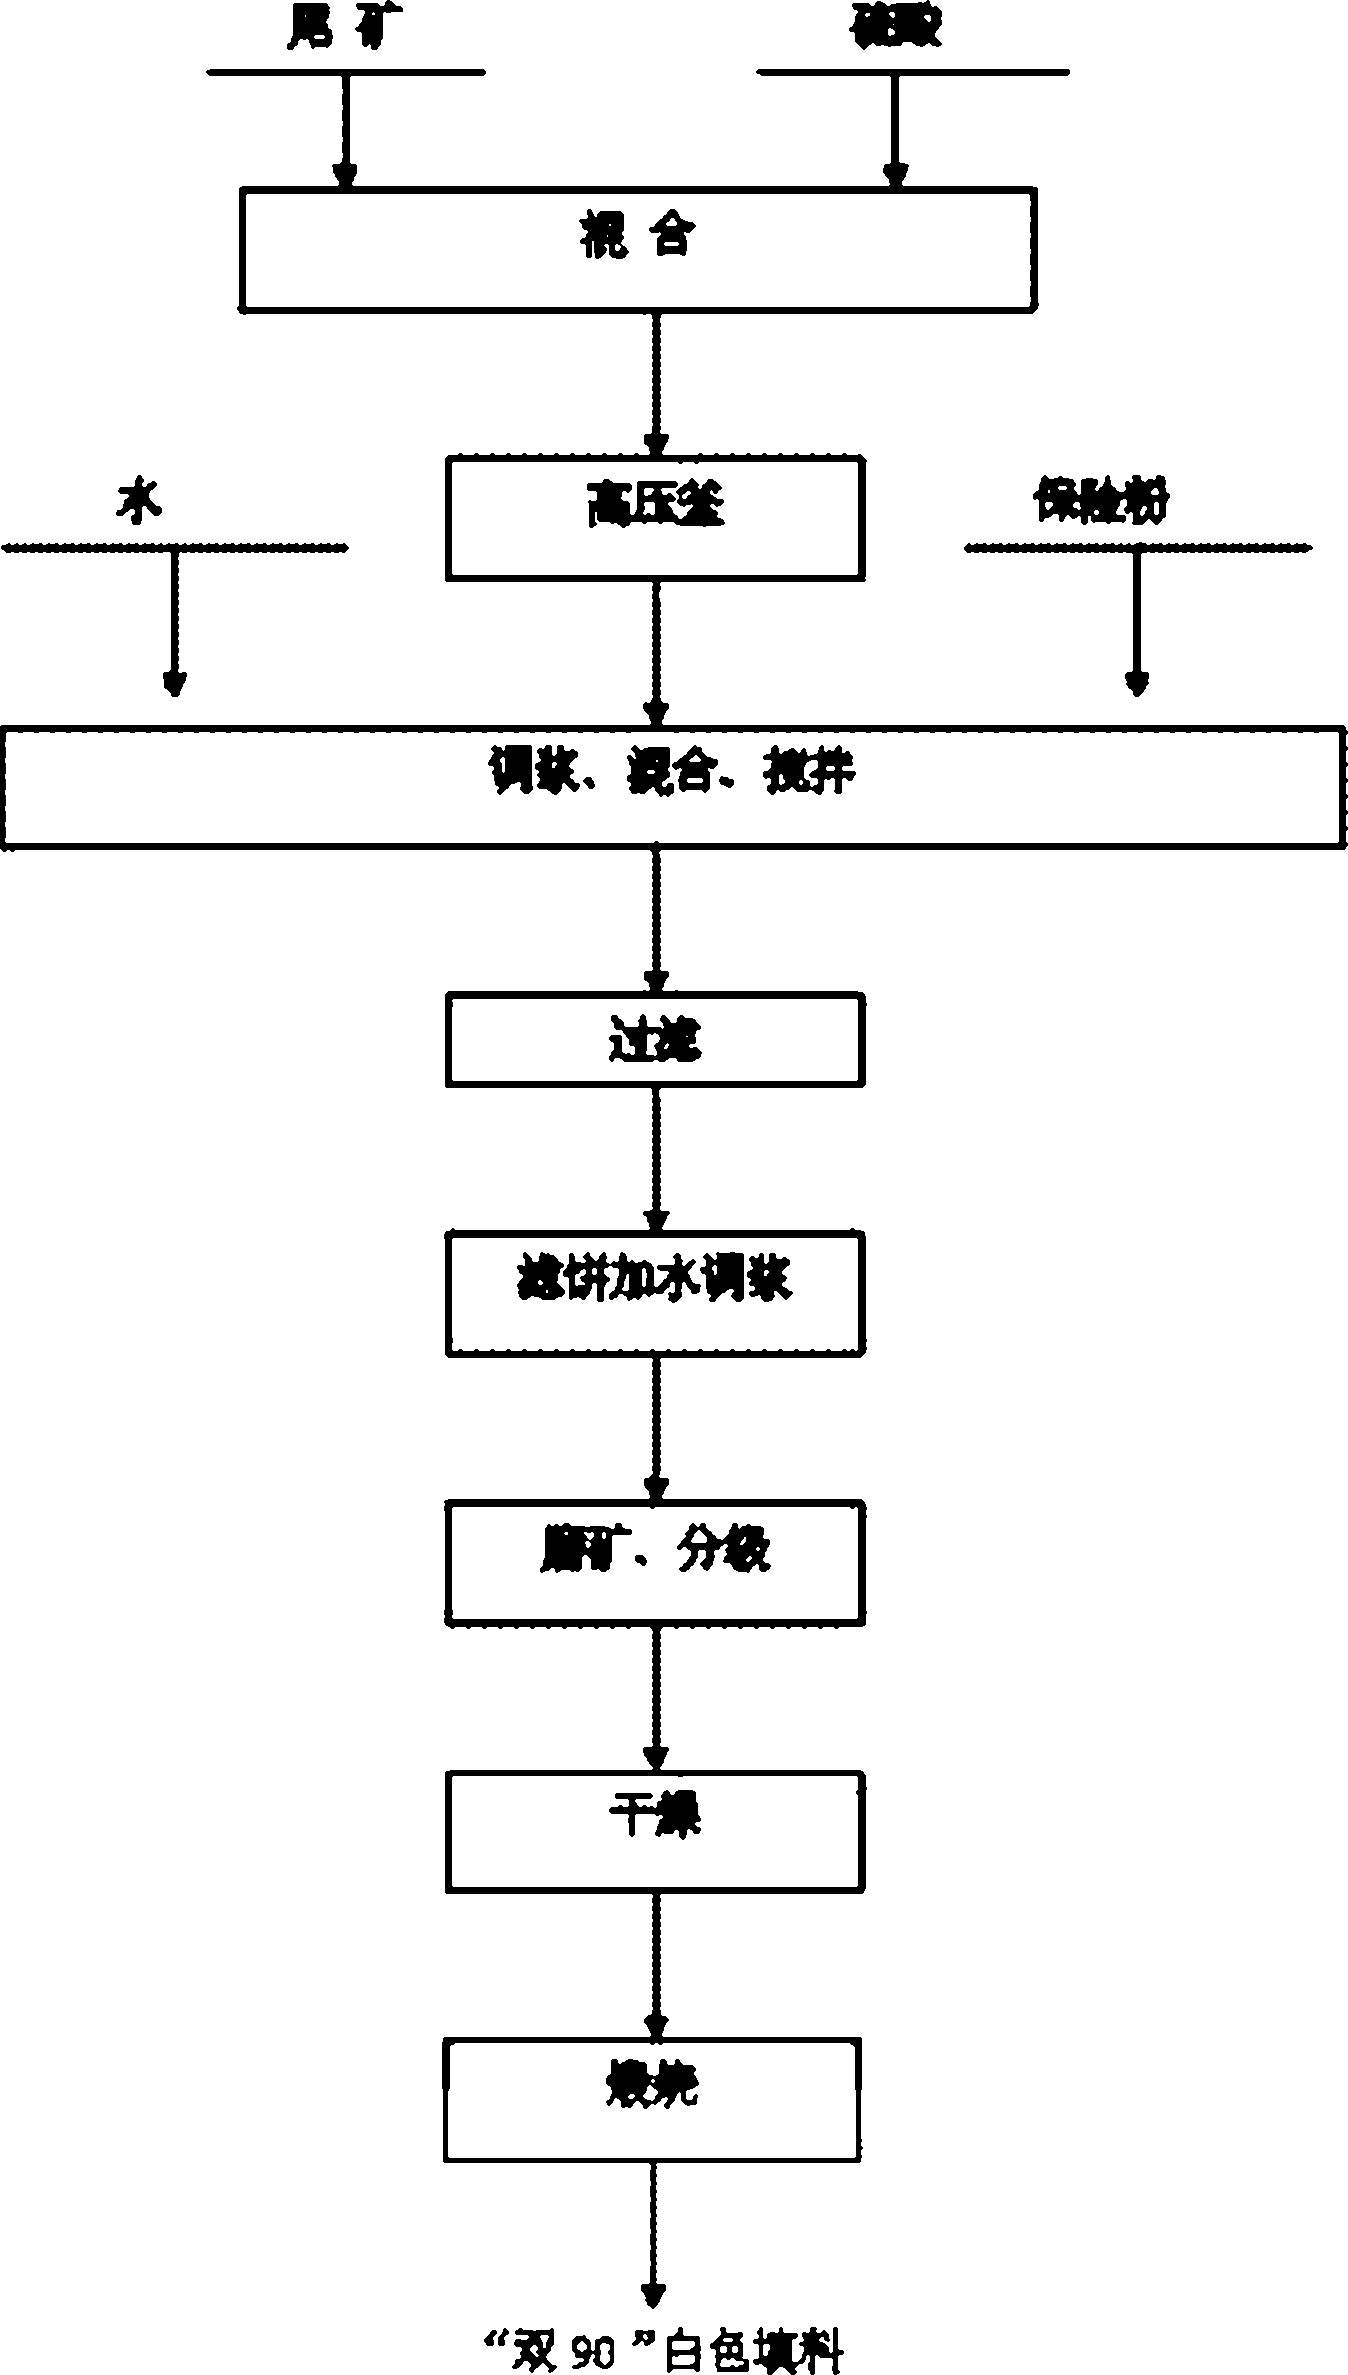 Method for preparing double-90 white filler from bauxite tailing